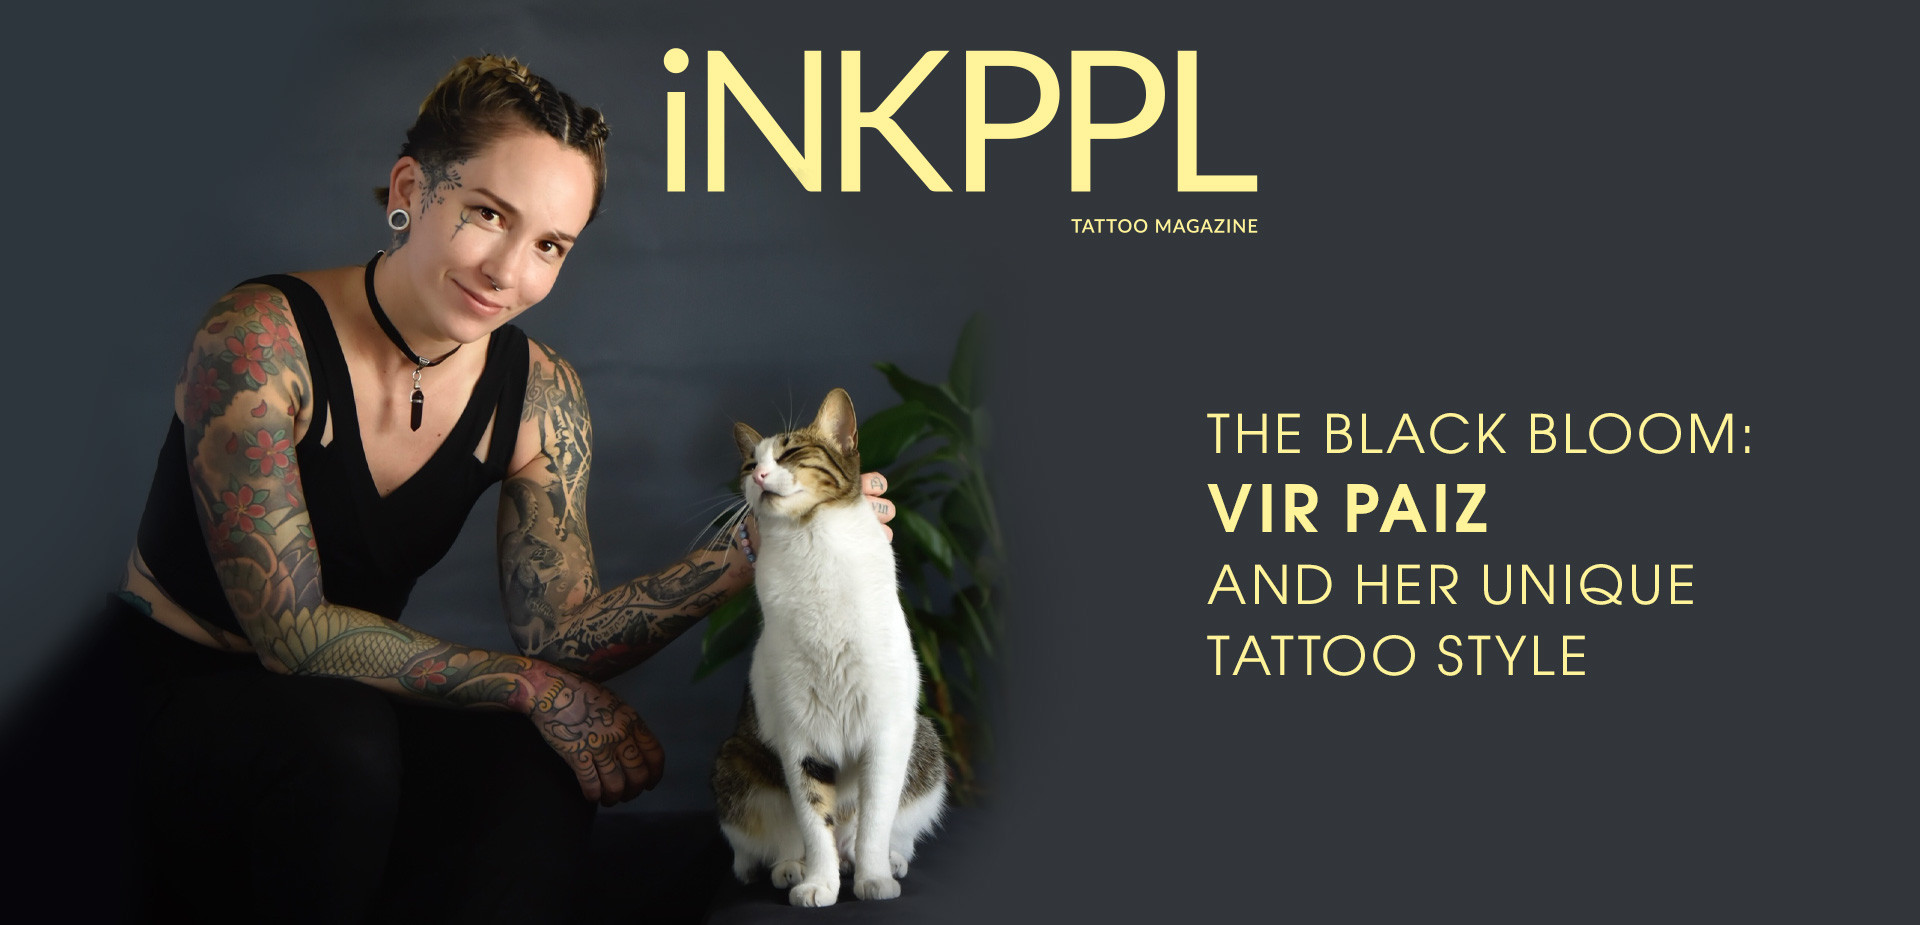 The Black Bloom: Vir Paiz and Her Unique Tattoo Style